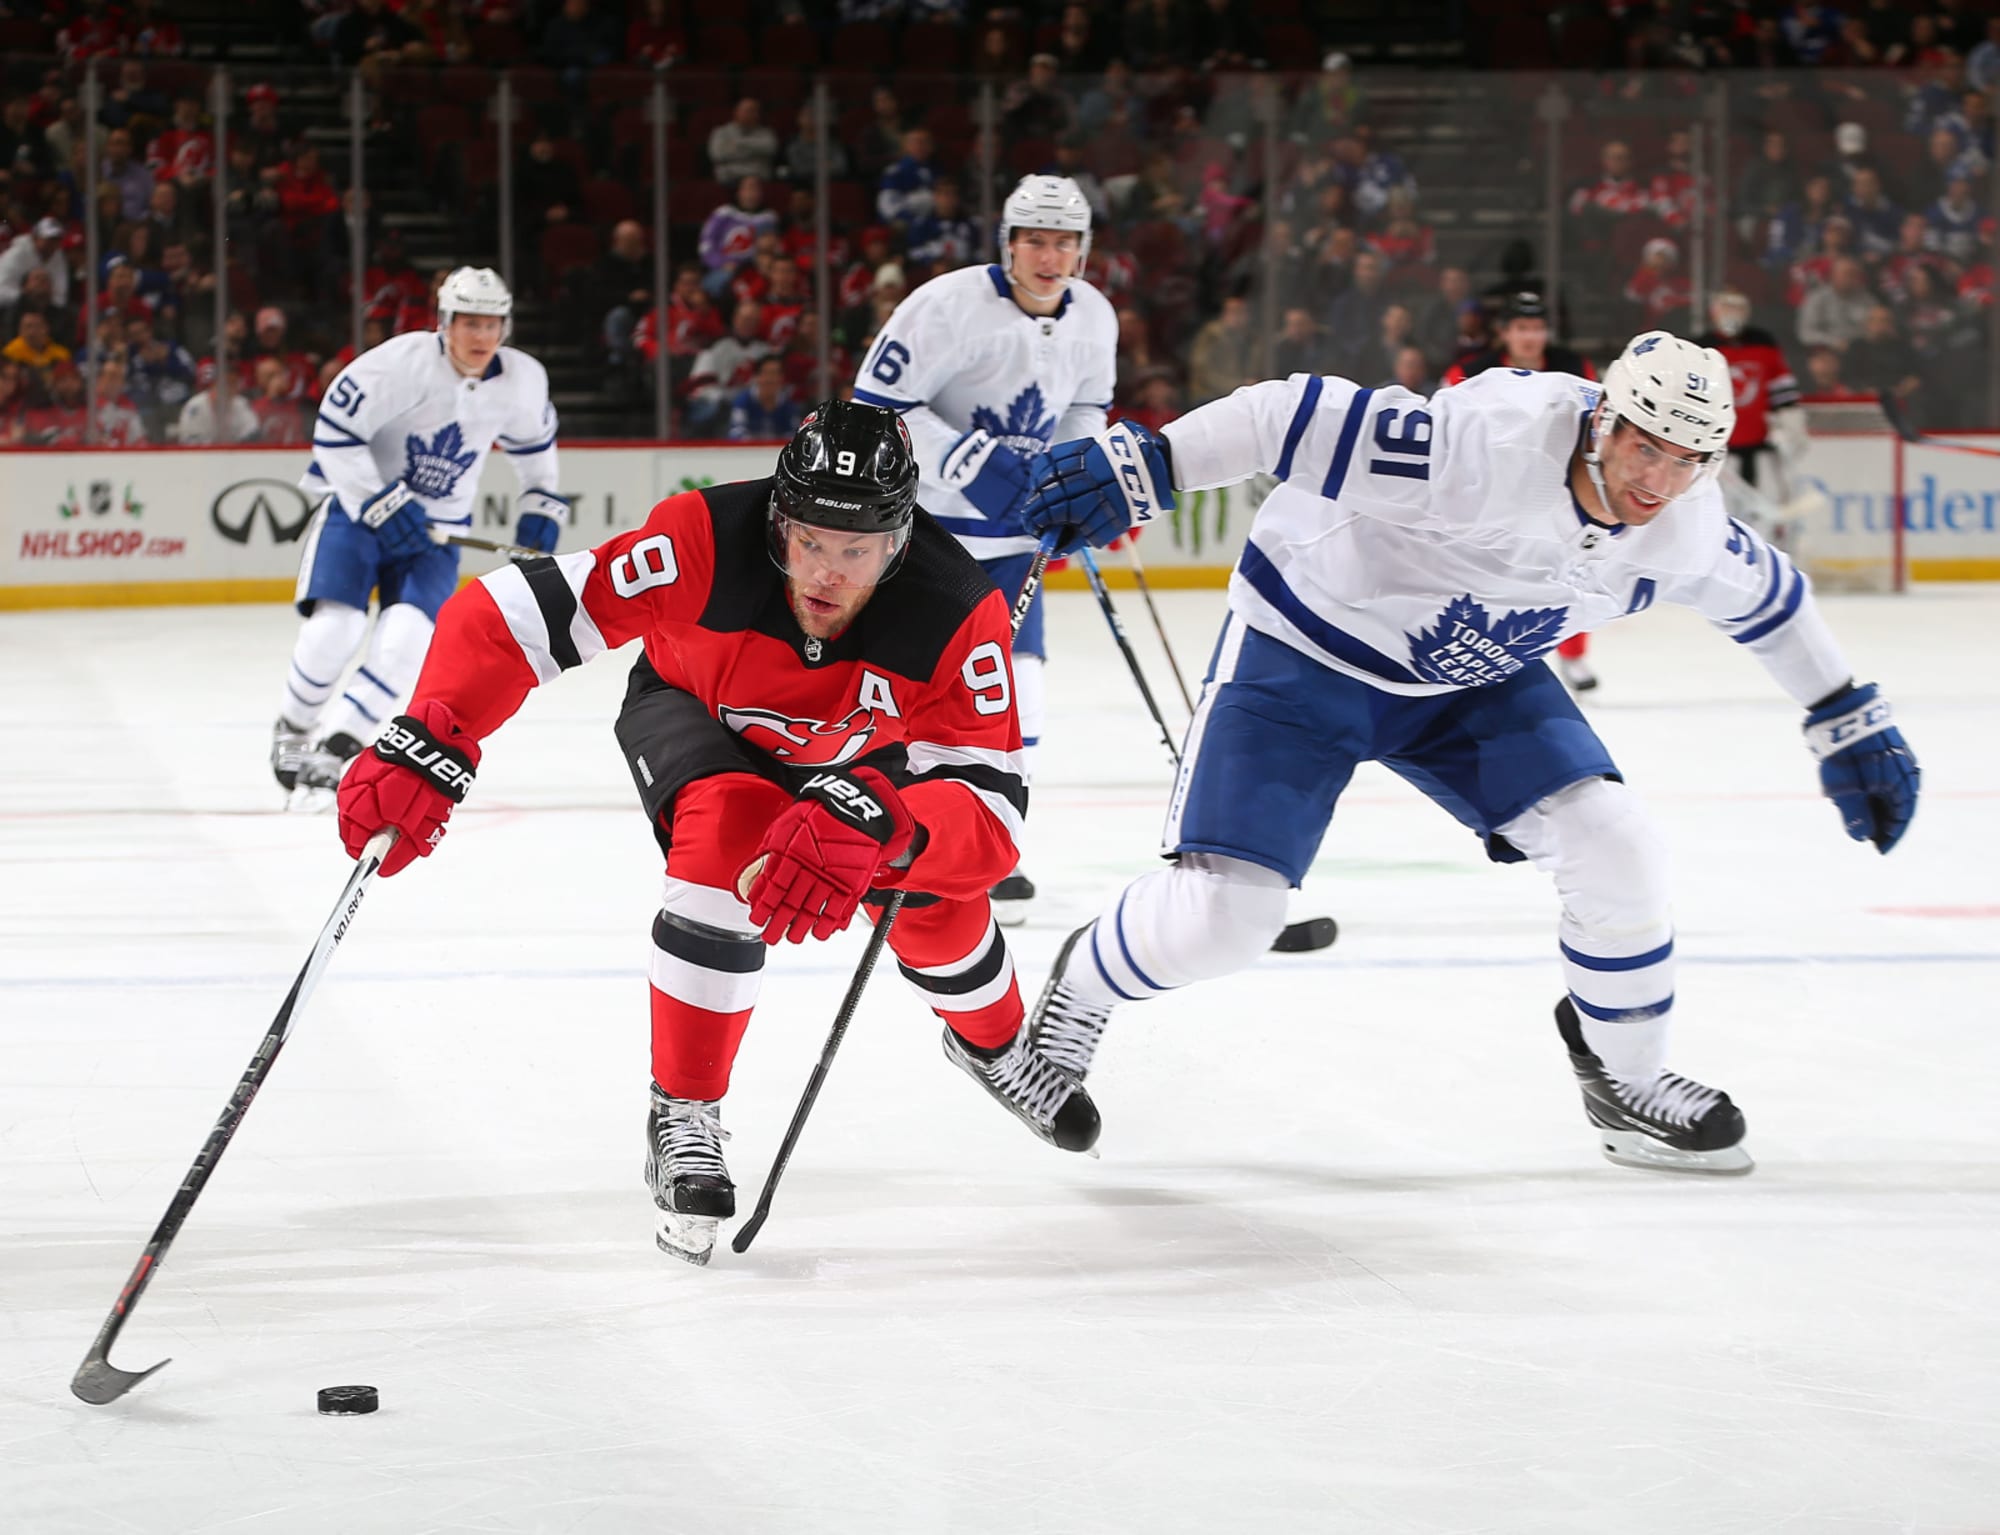 How Can New Jersey Devils Get to Toronto Maple Leafs Level?